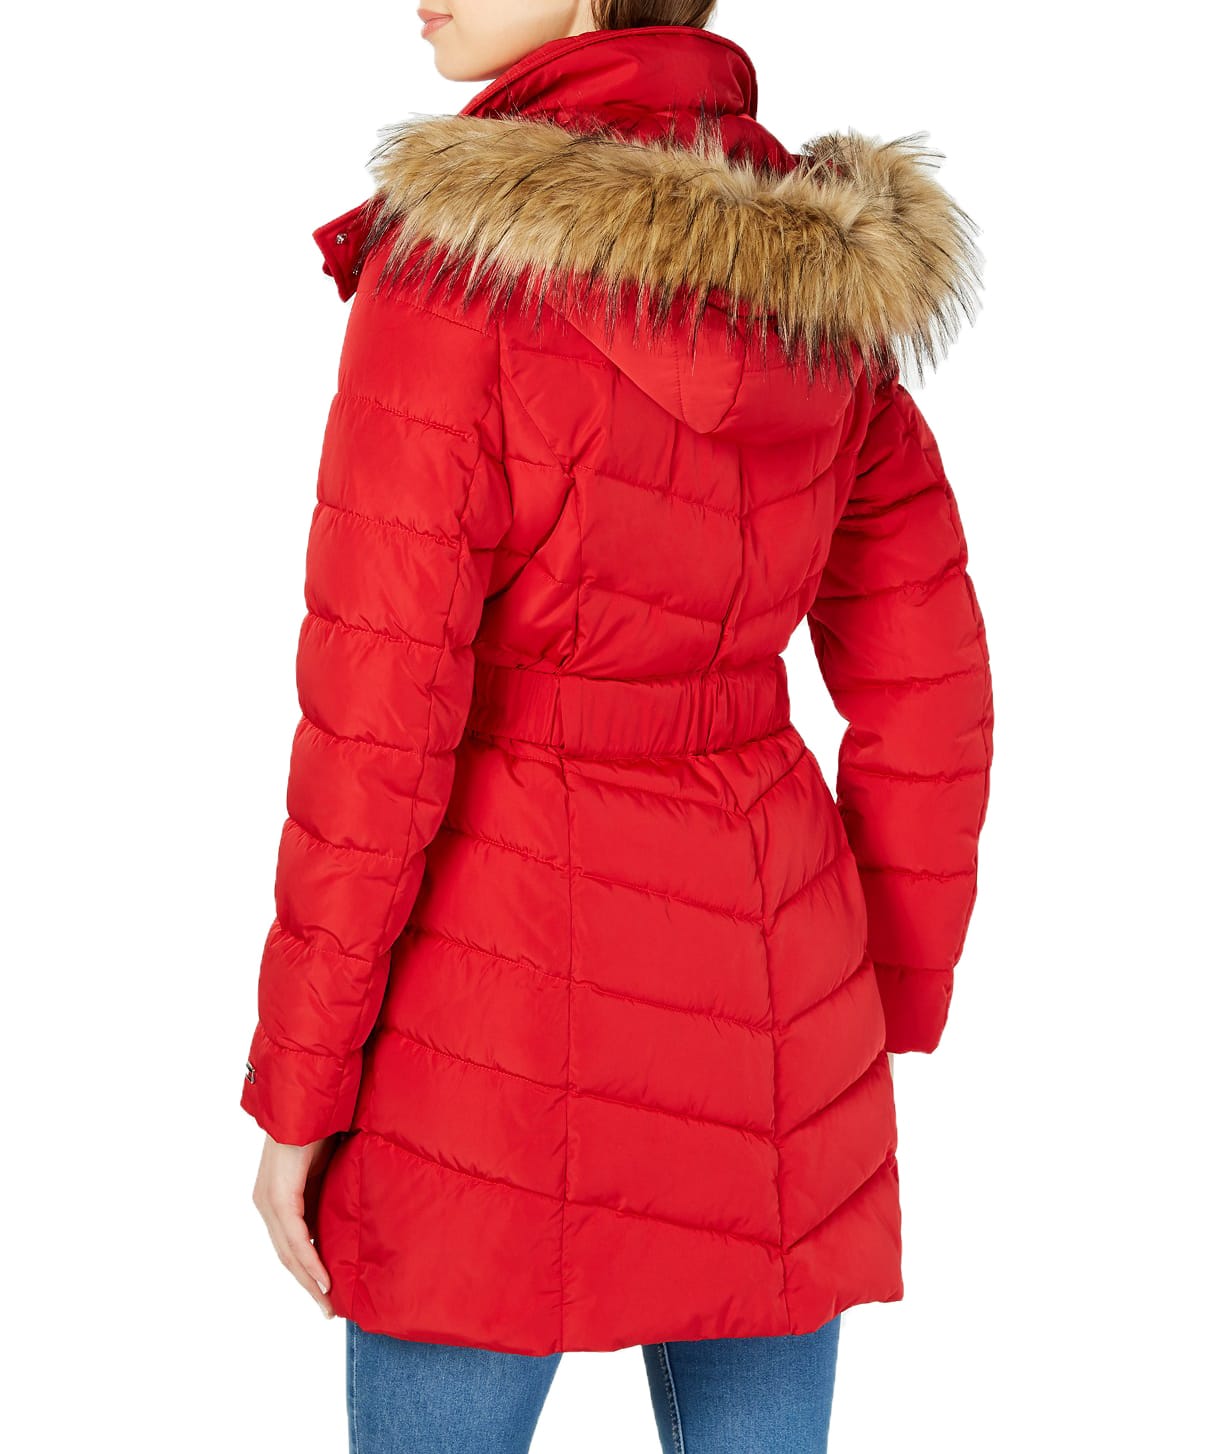 woocommerce-673321-2209615.cloudwaysapps.com-tommy-hilfiger-womens-red-belted-faux-fur-trim-hooded-puffer-coat